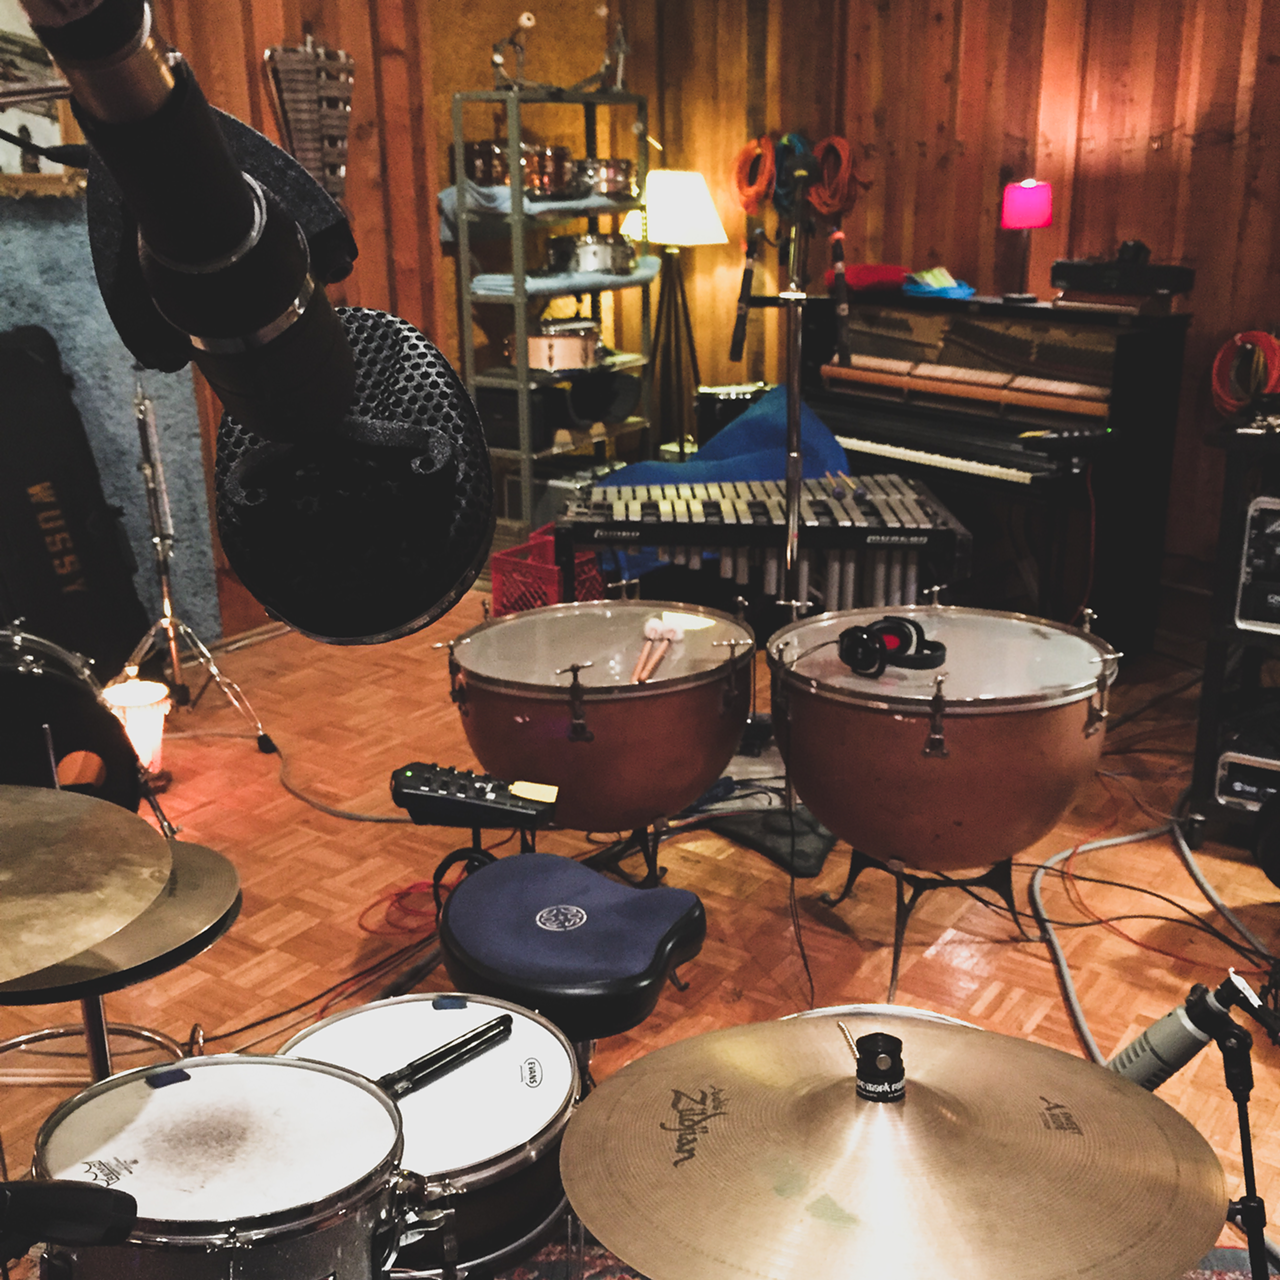 Ultrasuede Studio, set up for a recording session. The kettle drums are from the original King Studio in Evanston.